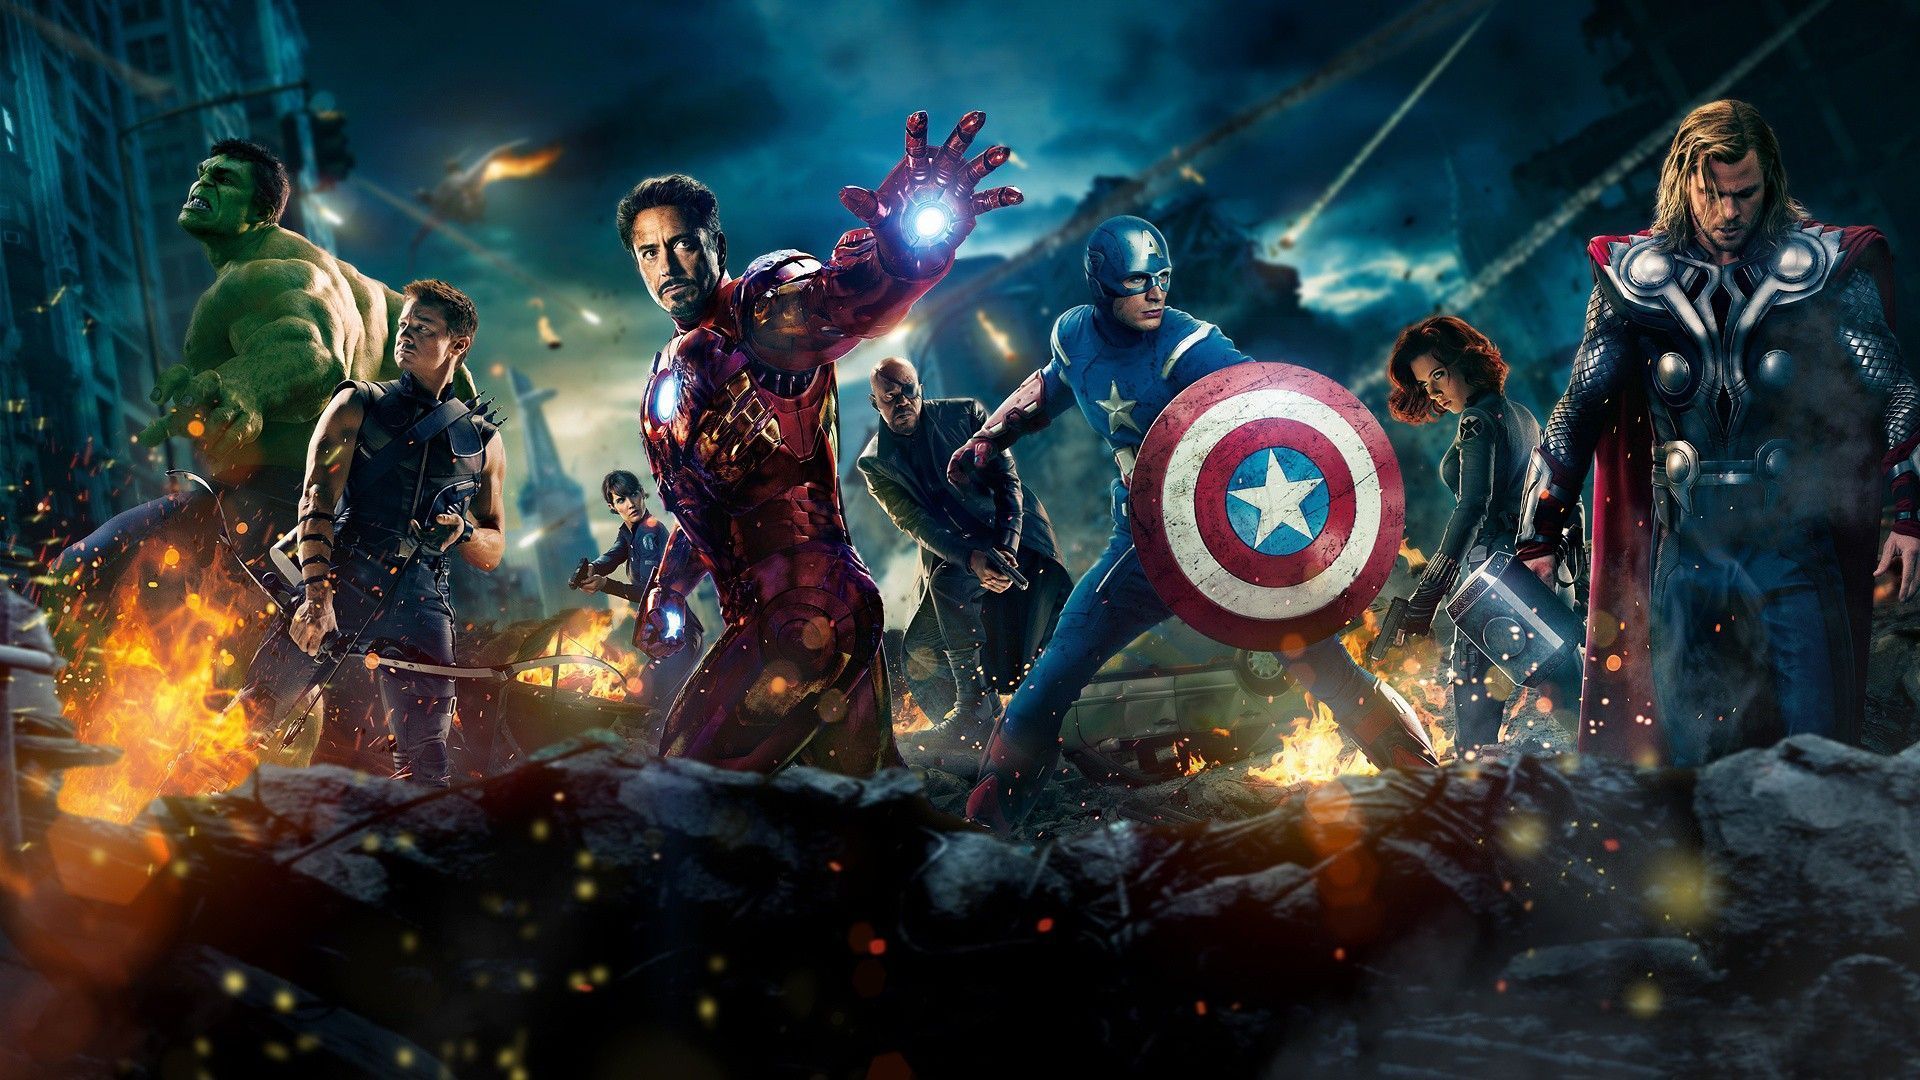 Captain America Avengers Awesome Wallpapers 4362 - HD Wallpapers Site